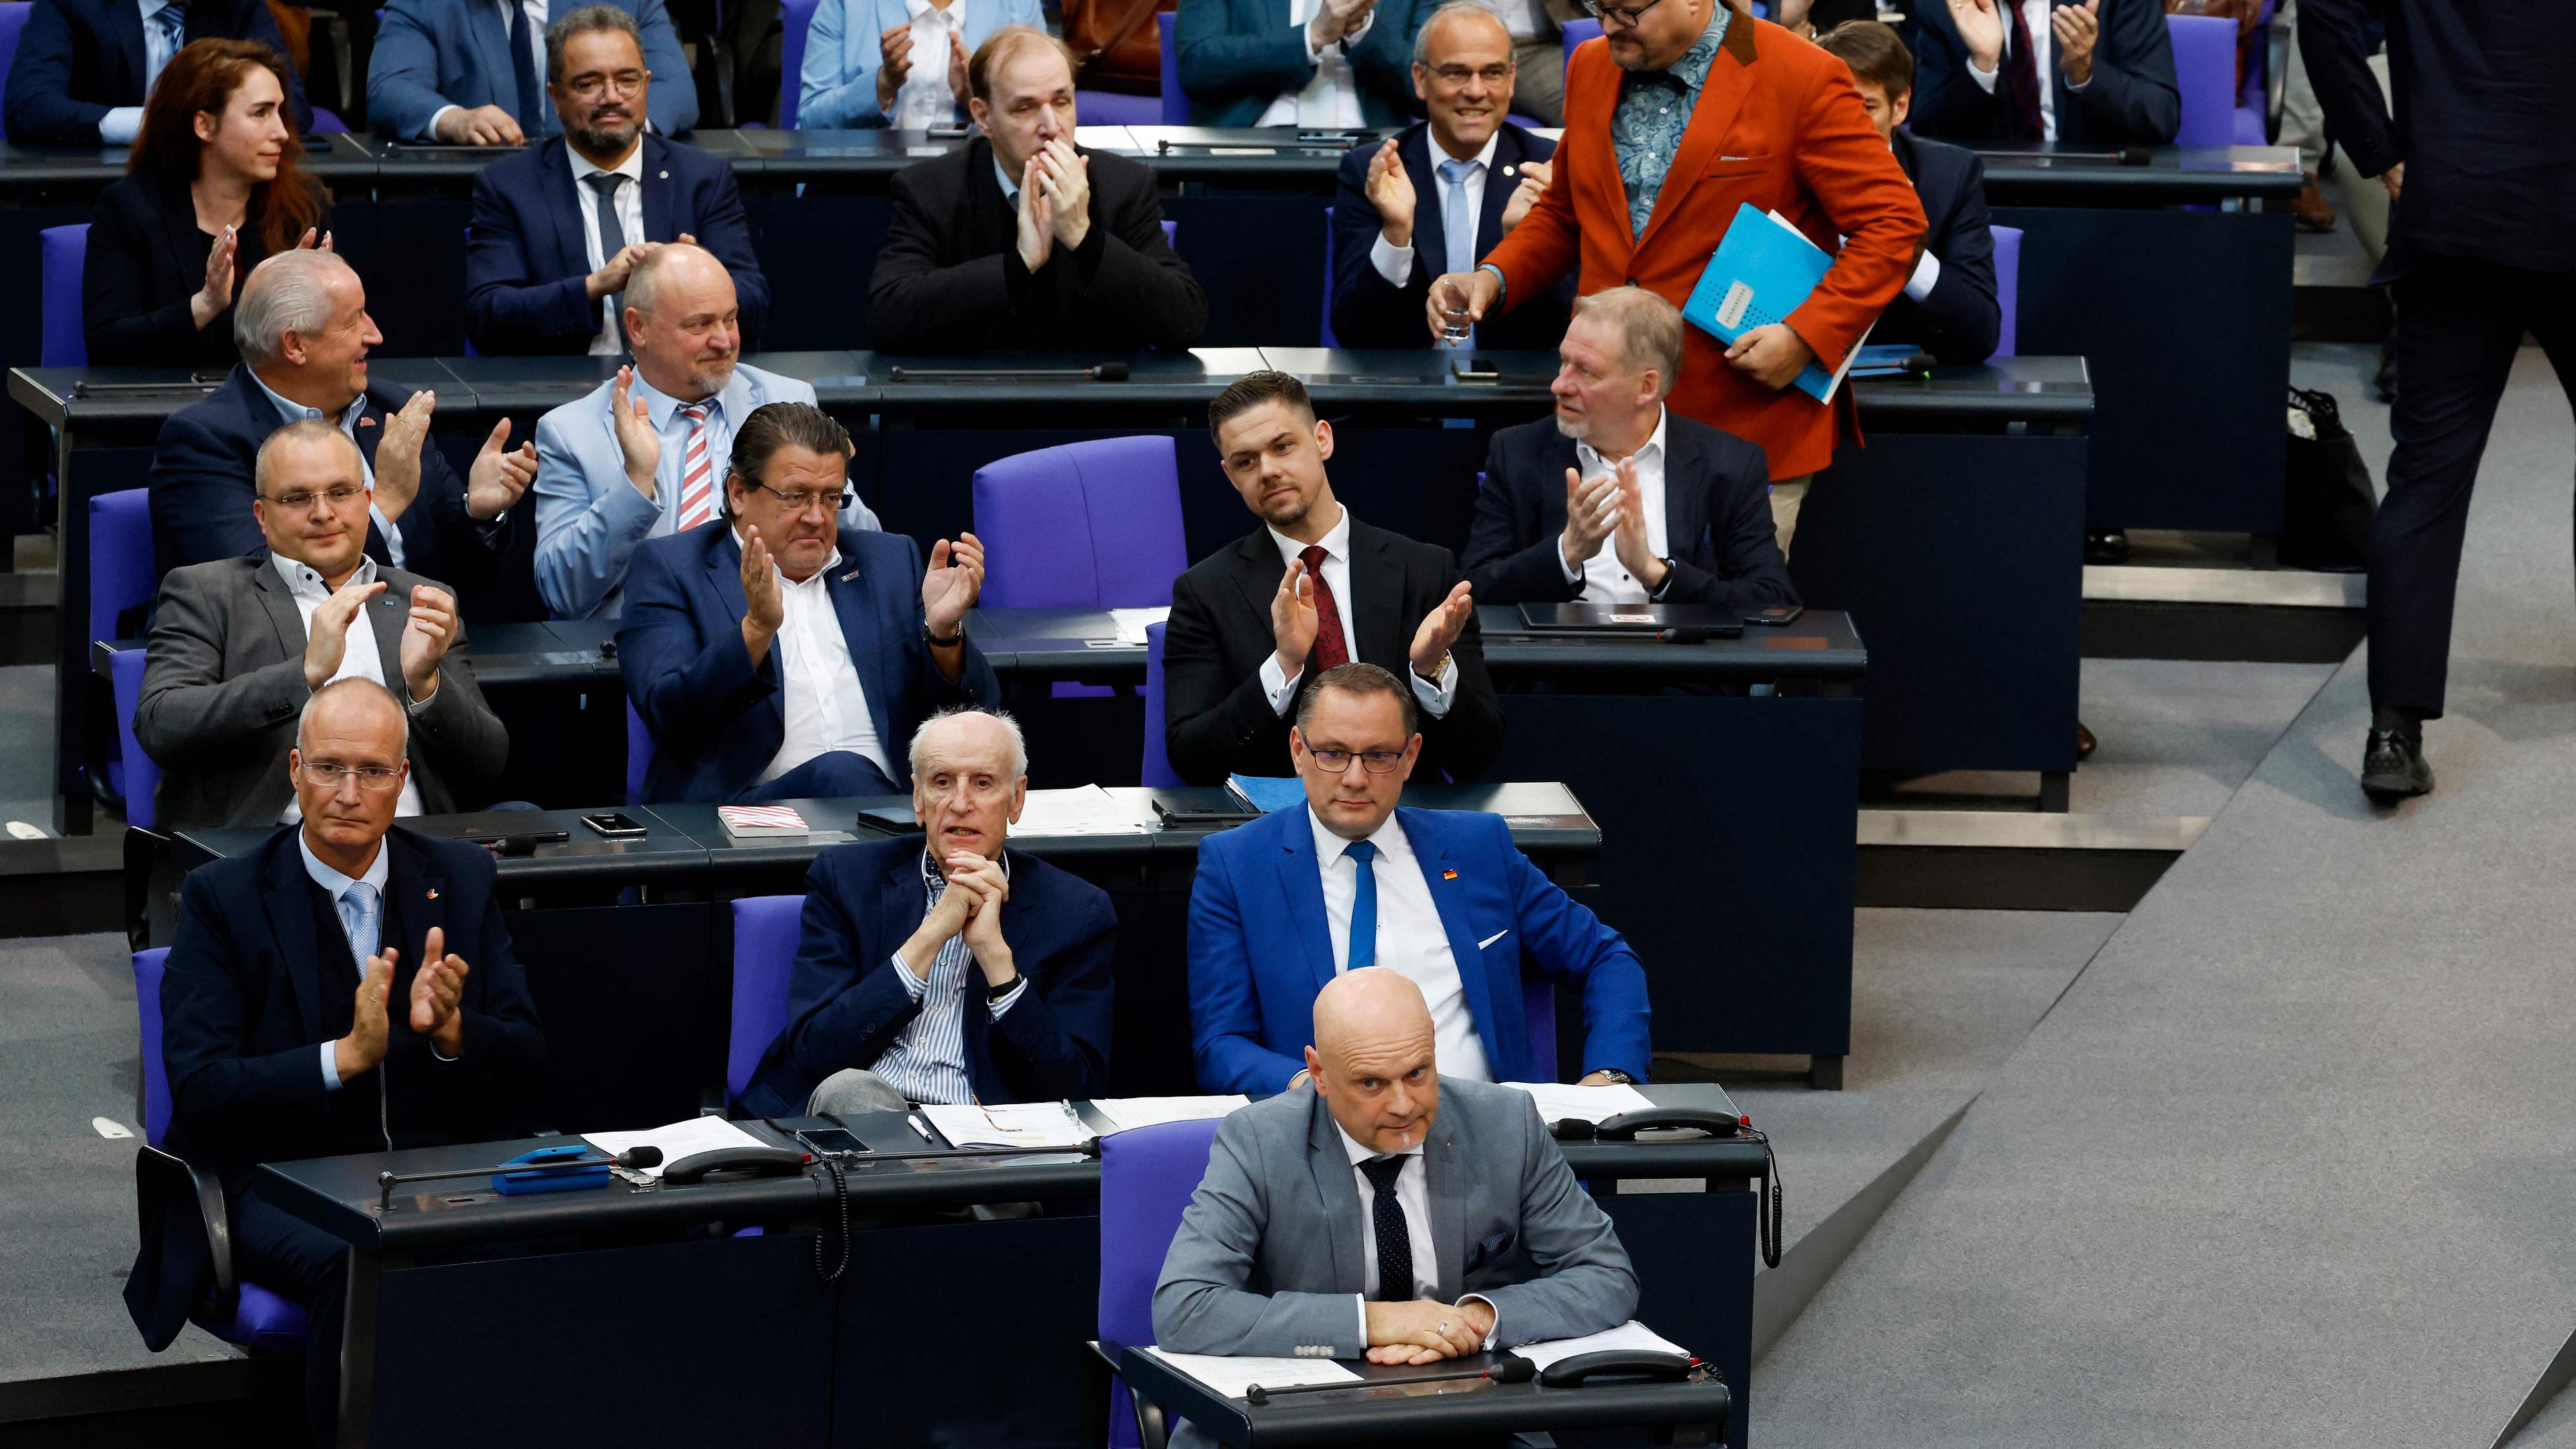 he co-leader of the far-right Alternative for Germany (AfD) party Tino Chrupalla (2nd row, R), fellow party member Albrecht Glaser (C) and AfD MP Enrico Komning (front) react as Stefan Keuter, Deputy leader of the AfD parliamentary group in the Bundestag, returns to his seat after delivering a speech during a debate at the Bundestag on the topic "Threat to our democracy - Russia, China and the role of the AfD"